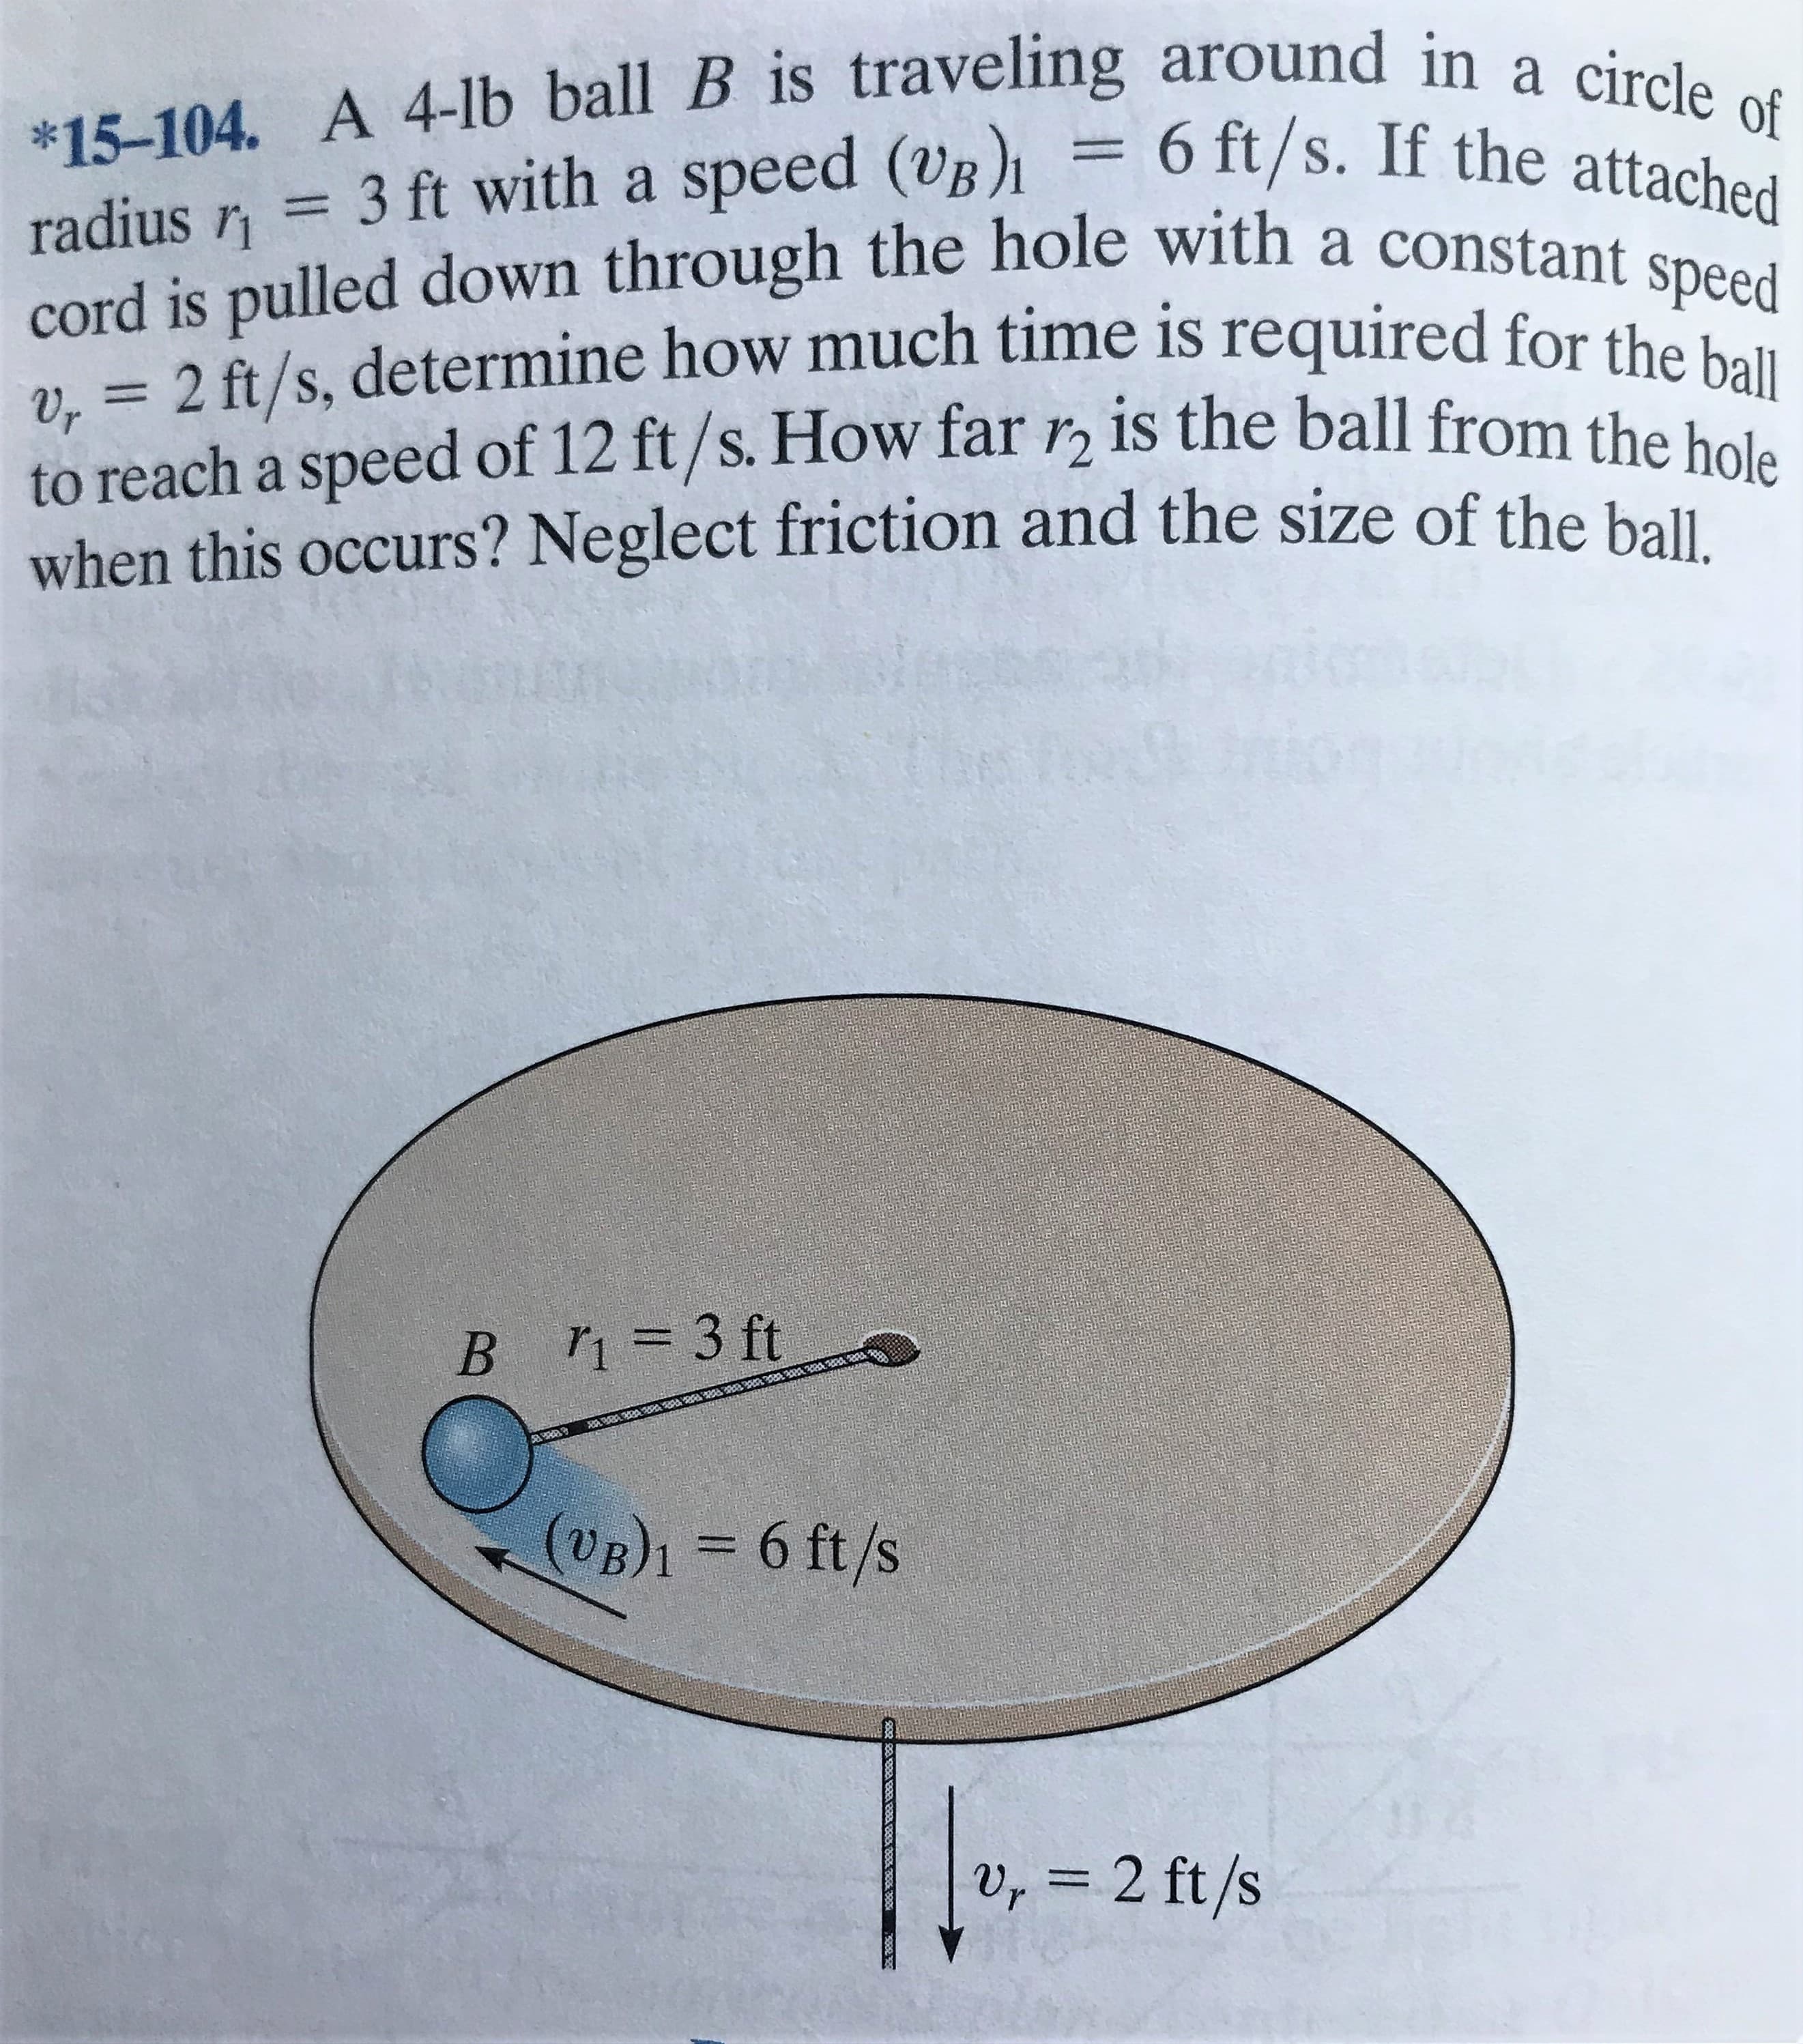 *15-104. A 4-lb ball B is traveling around in a circle of
radius = 3 ft with a speed (VB)1 = 6 ft/s. If the attached
cord is pulled down through the hole with a constant speed
2 = 2 ft/s, determine how much time is required for the ba
to reach a speed of 12 ft/s. How far r, is the ball from the hole
when this occurs? Neglect friction and the size of the bal
%3D
Vr
B =3 ft
(VB)1 = 6 ft/s
v, = 2 ft/s
